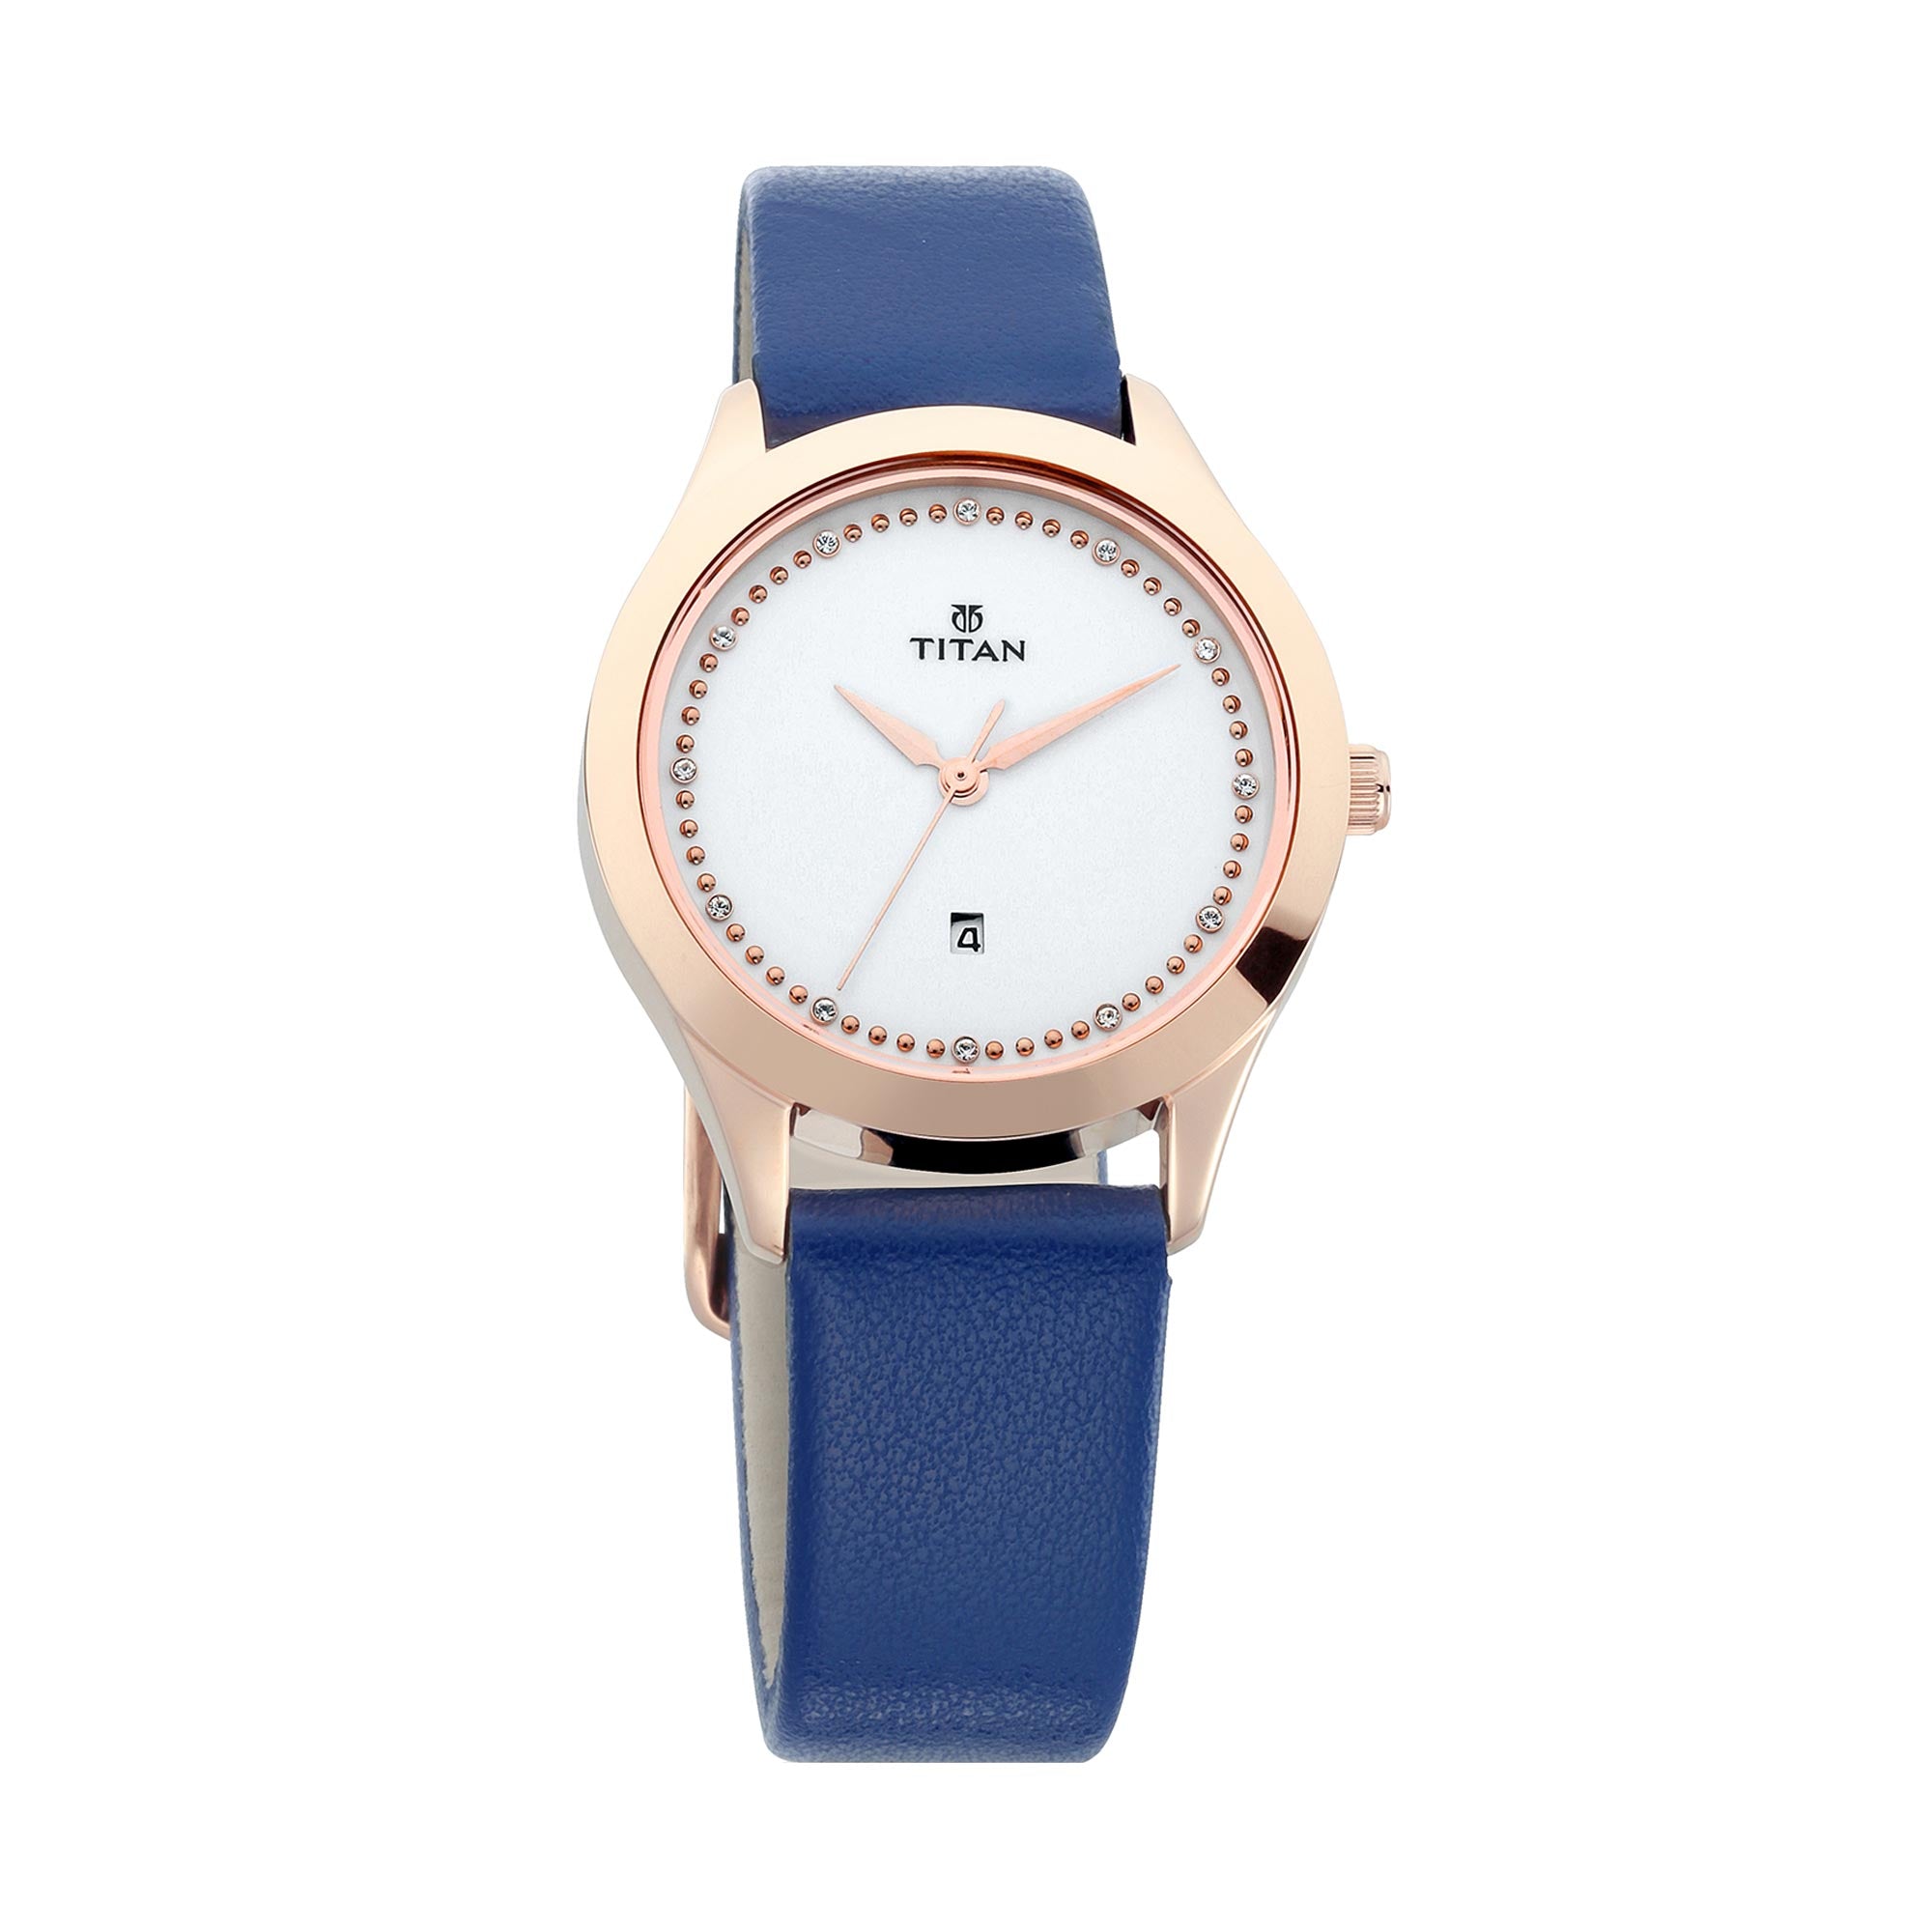 Titan Sparkle Analog Women's Watch 2570WL02 | Leather Band | Water-Resistant | Quartz Movement | Classic Style | Fashionable | Durable | Affordable | Halabh.com